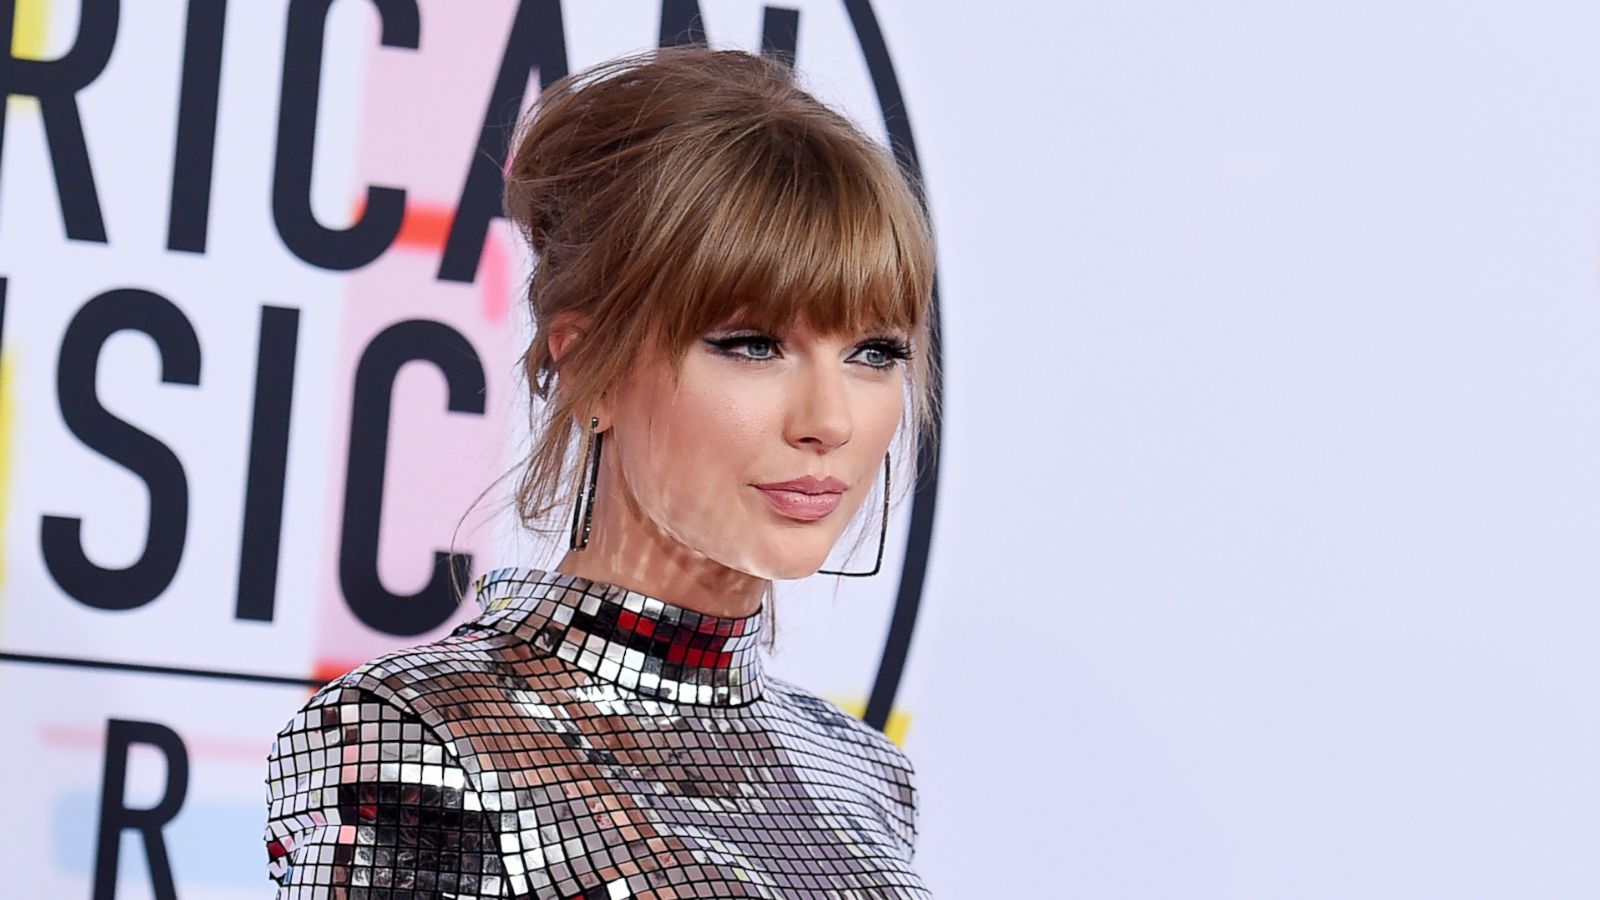 PHOTO: Taylor Swift arrives at the American Music Awards at the Microsoft Theater in Los Angeles, Oct. 9, 2018.